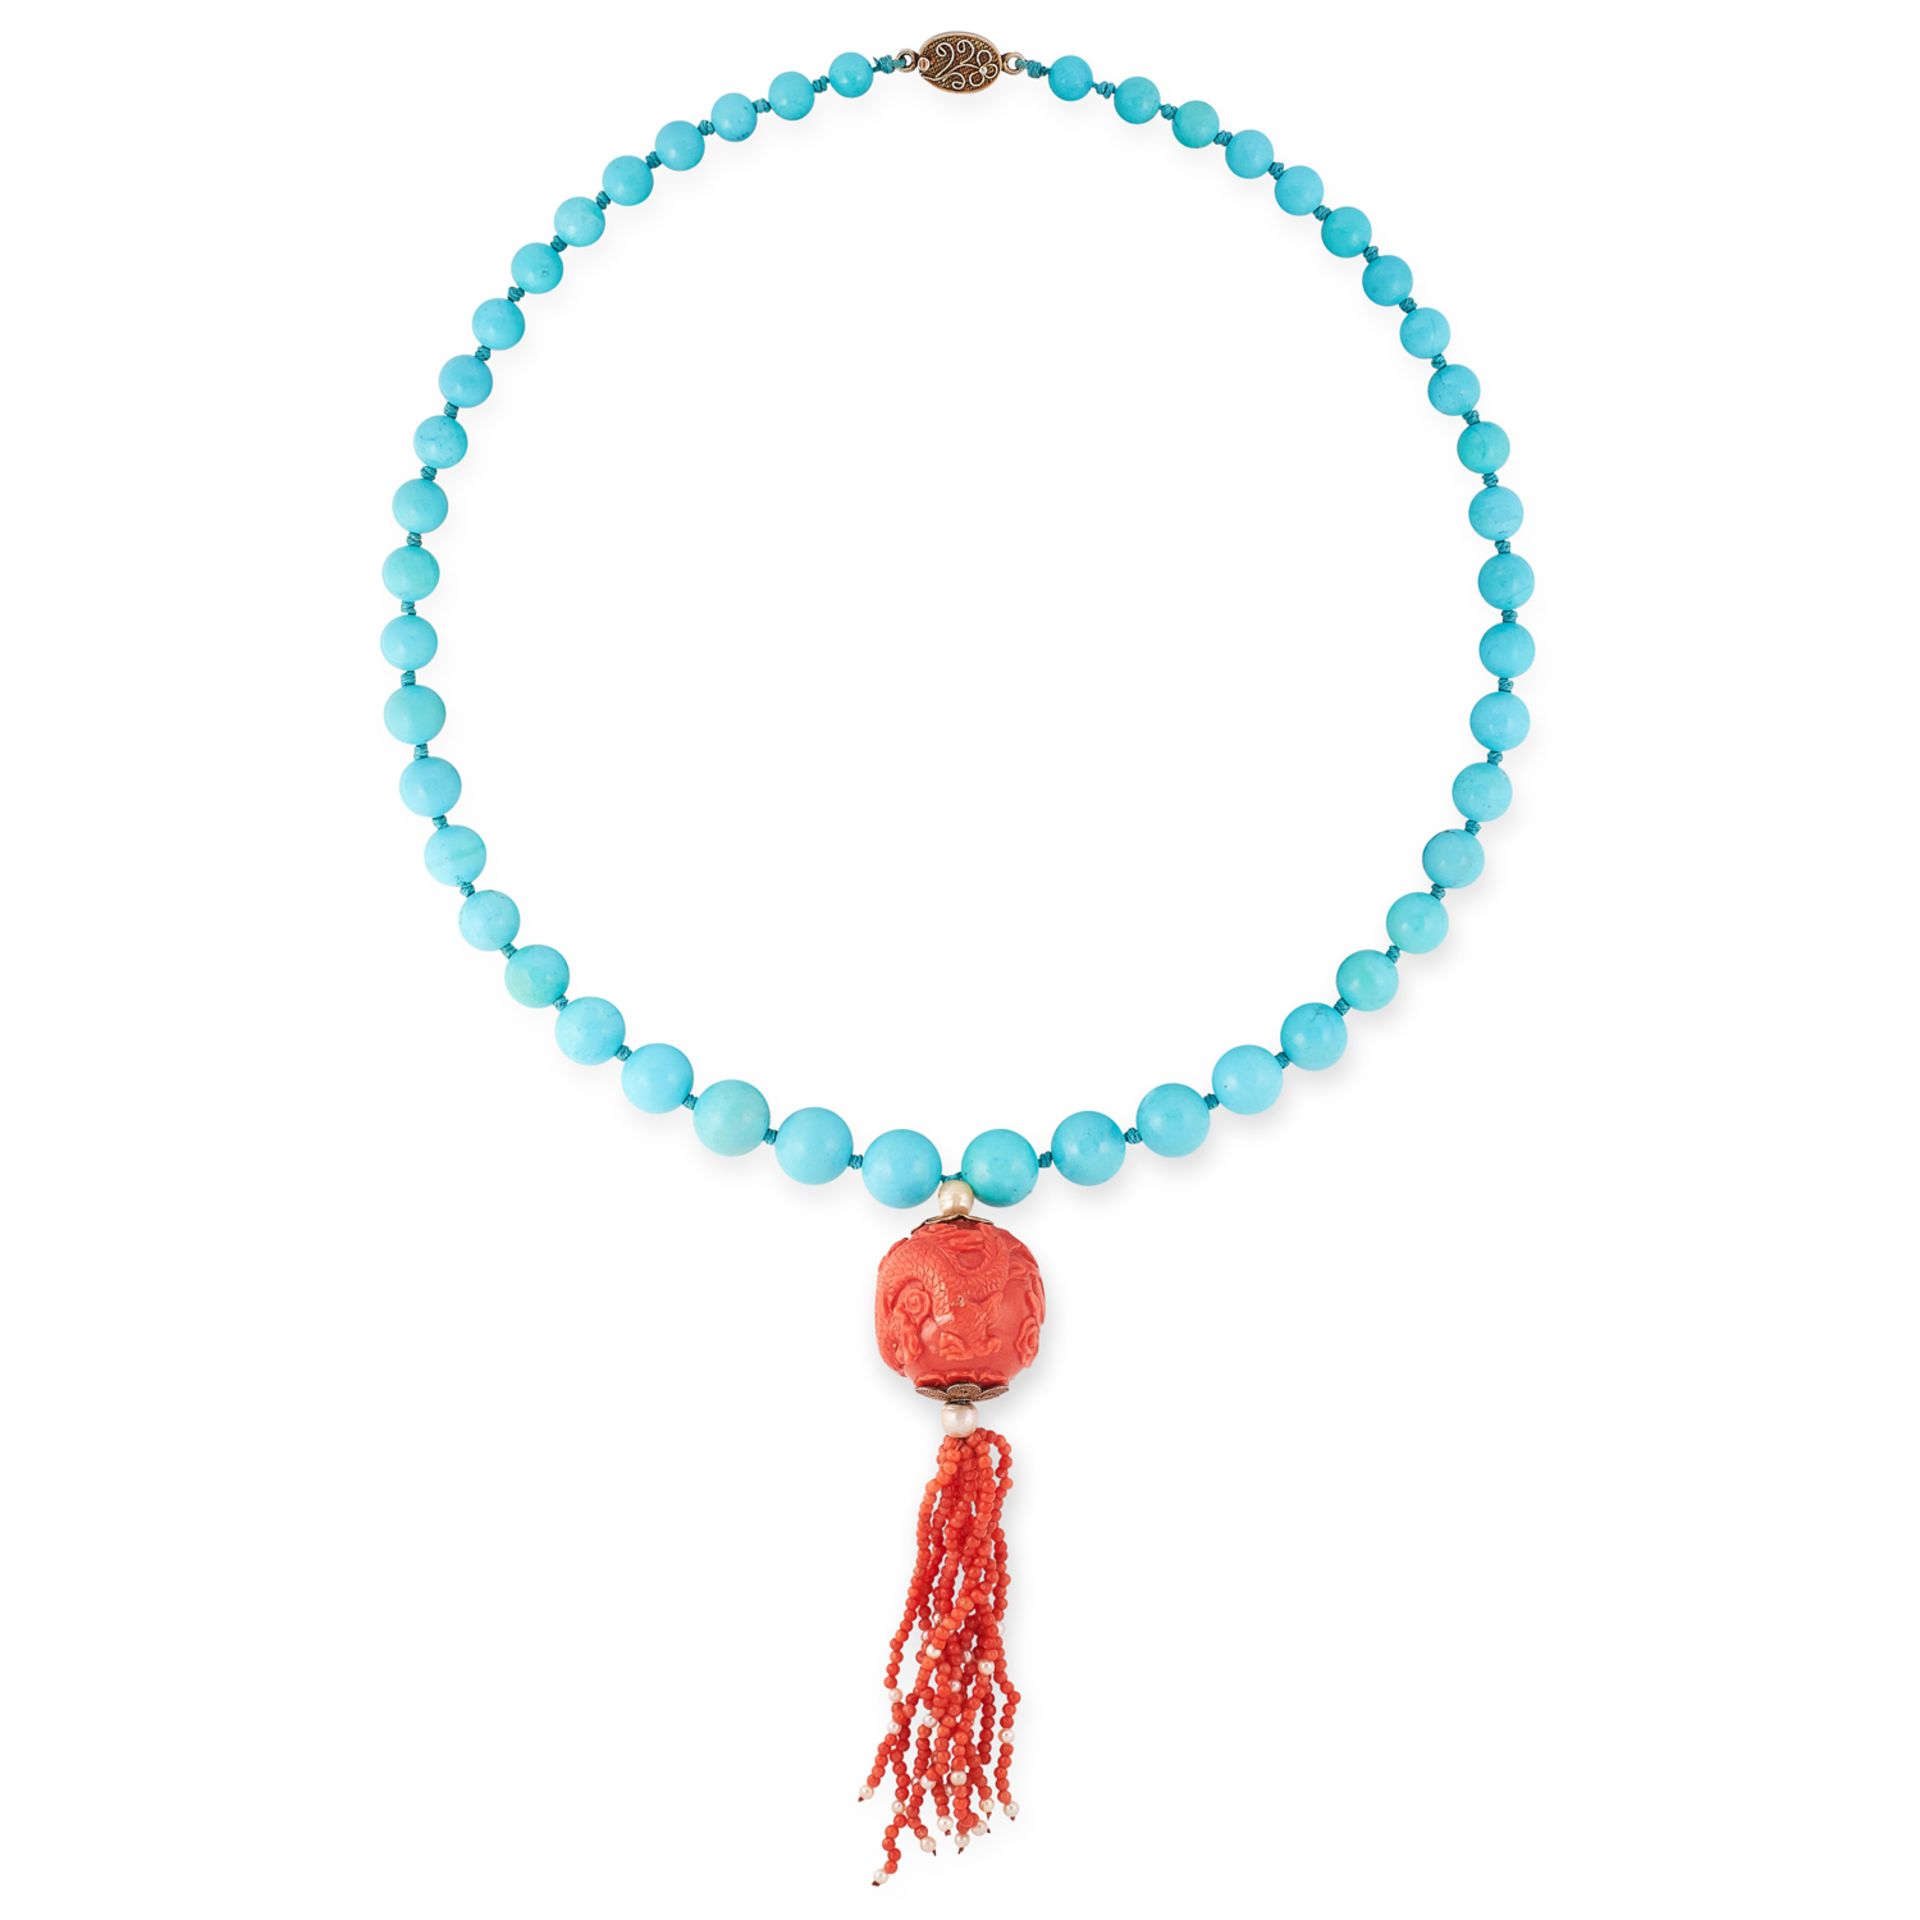 A CHINESE CARVED CORAL AND TURQUOISE NECKLACE comprising a single row of forty-six graduated round